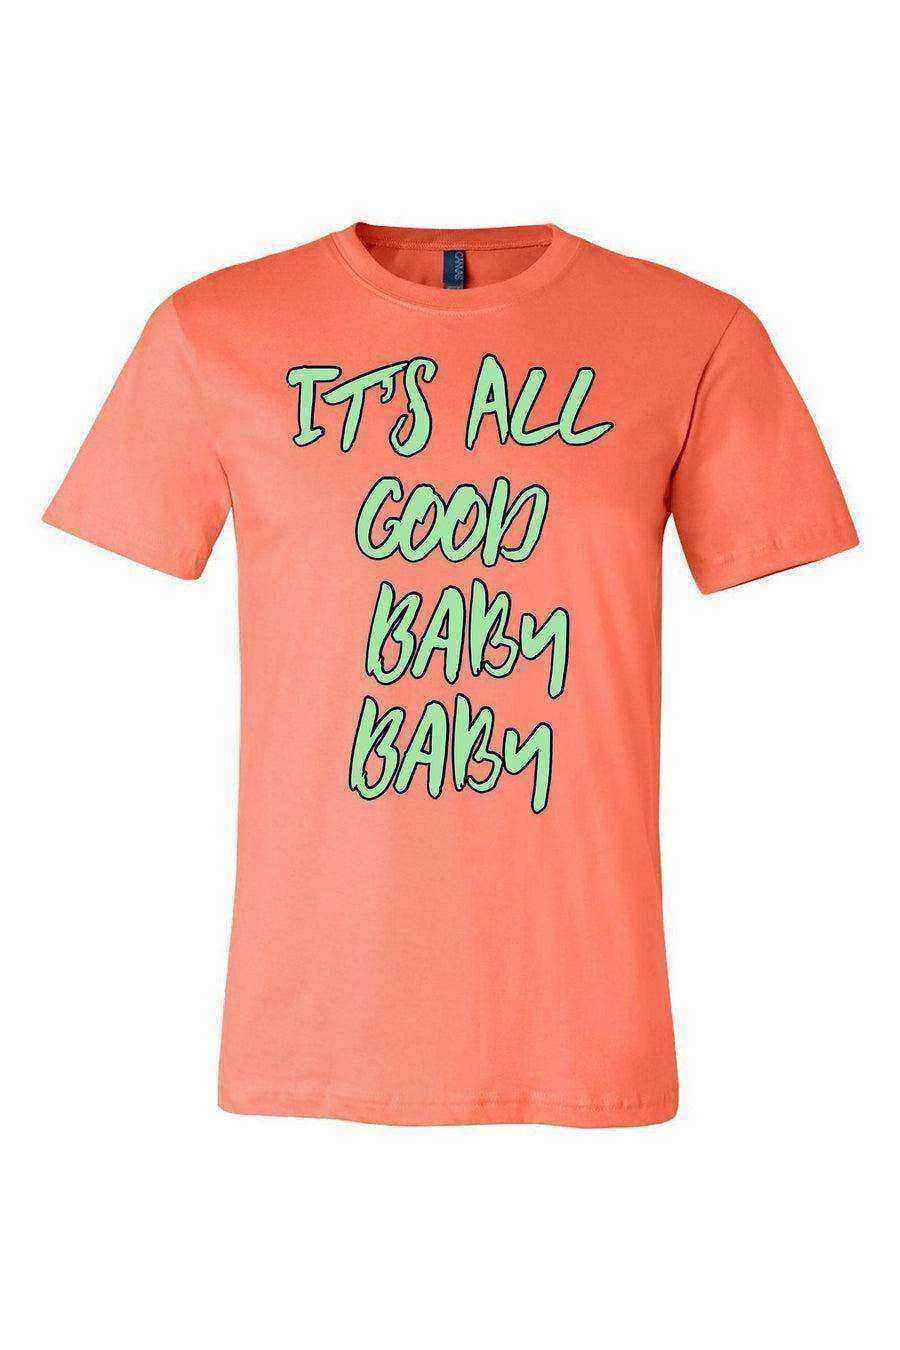 It’s All Good Baby Baby Shirt | Hip Hop Tee - Dylan's Tees